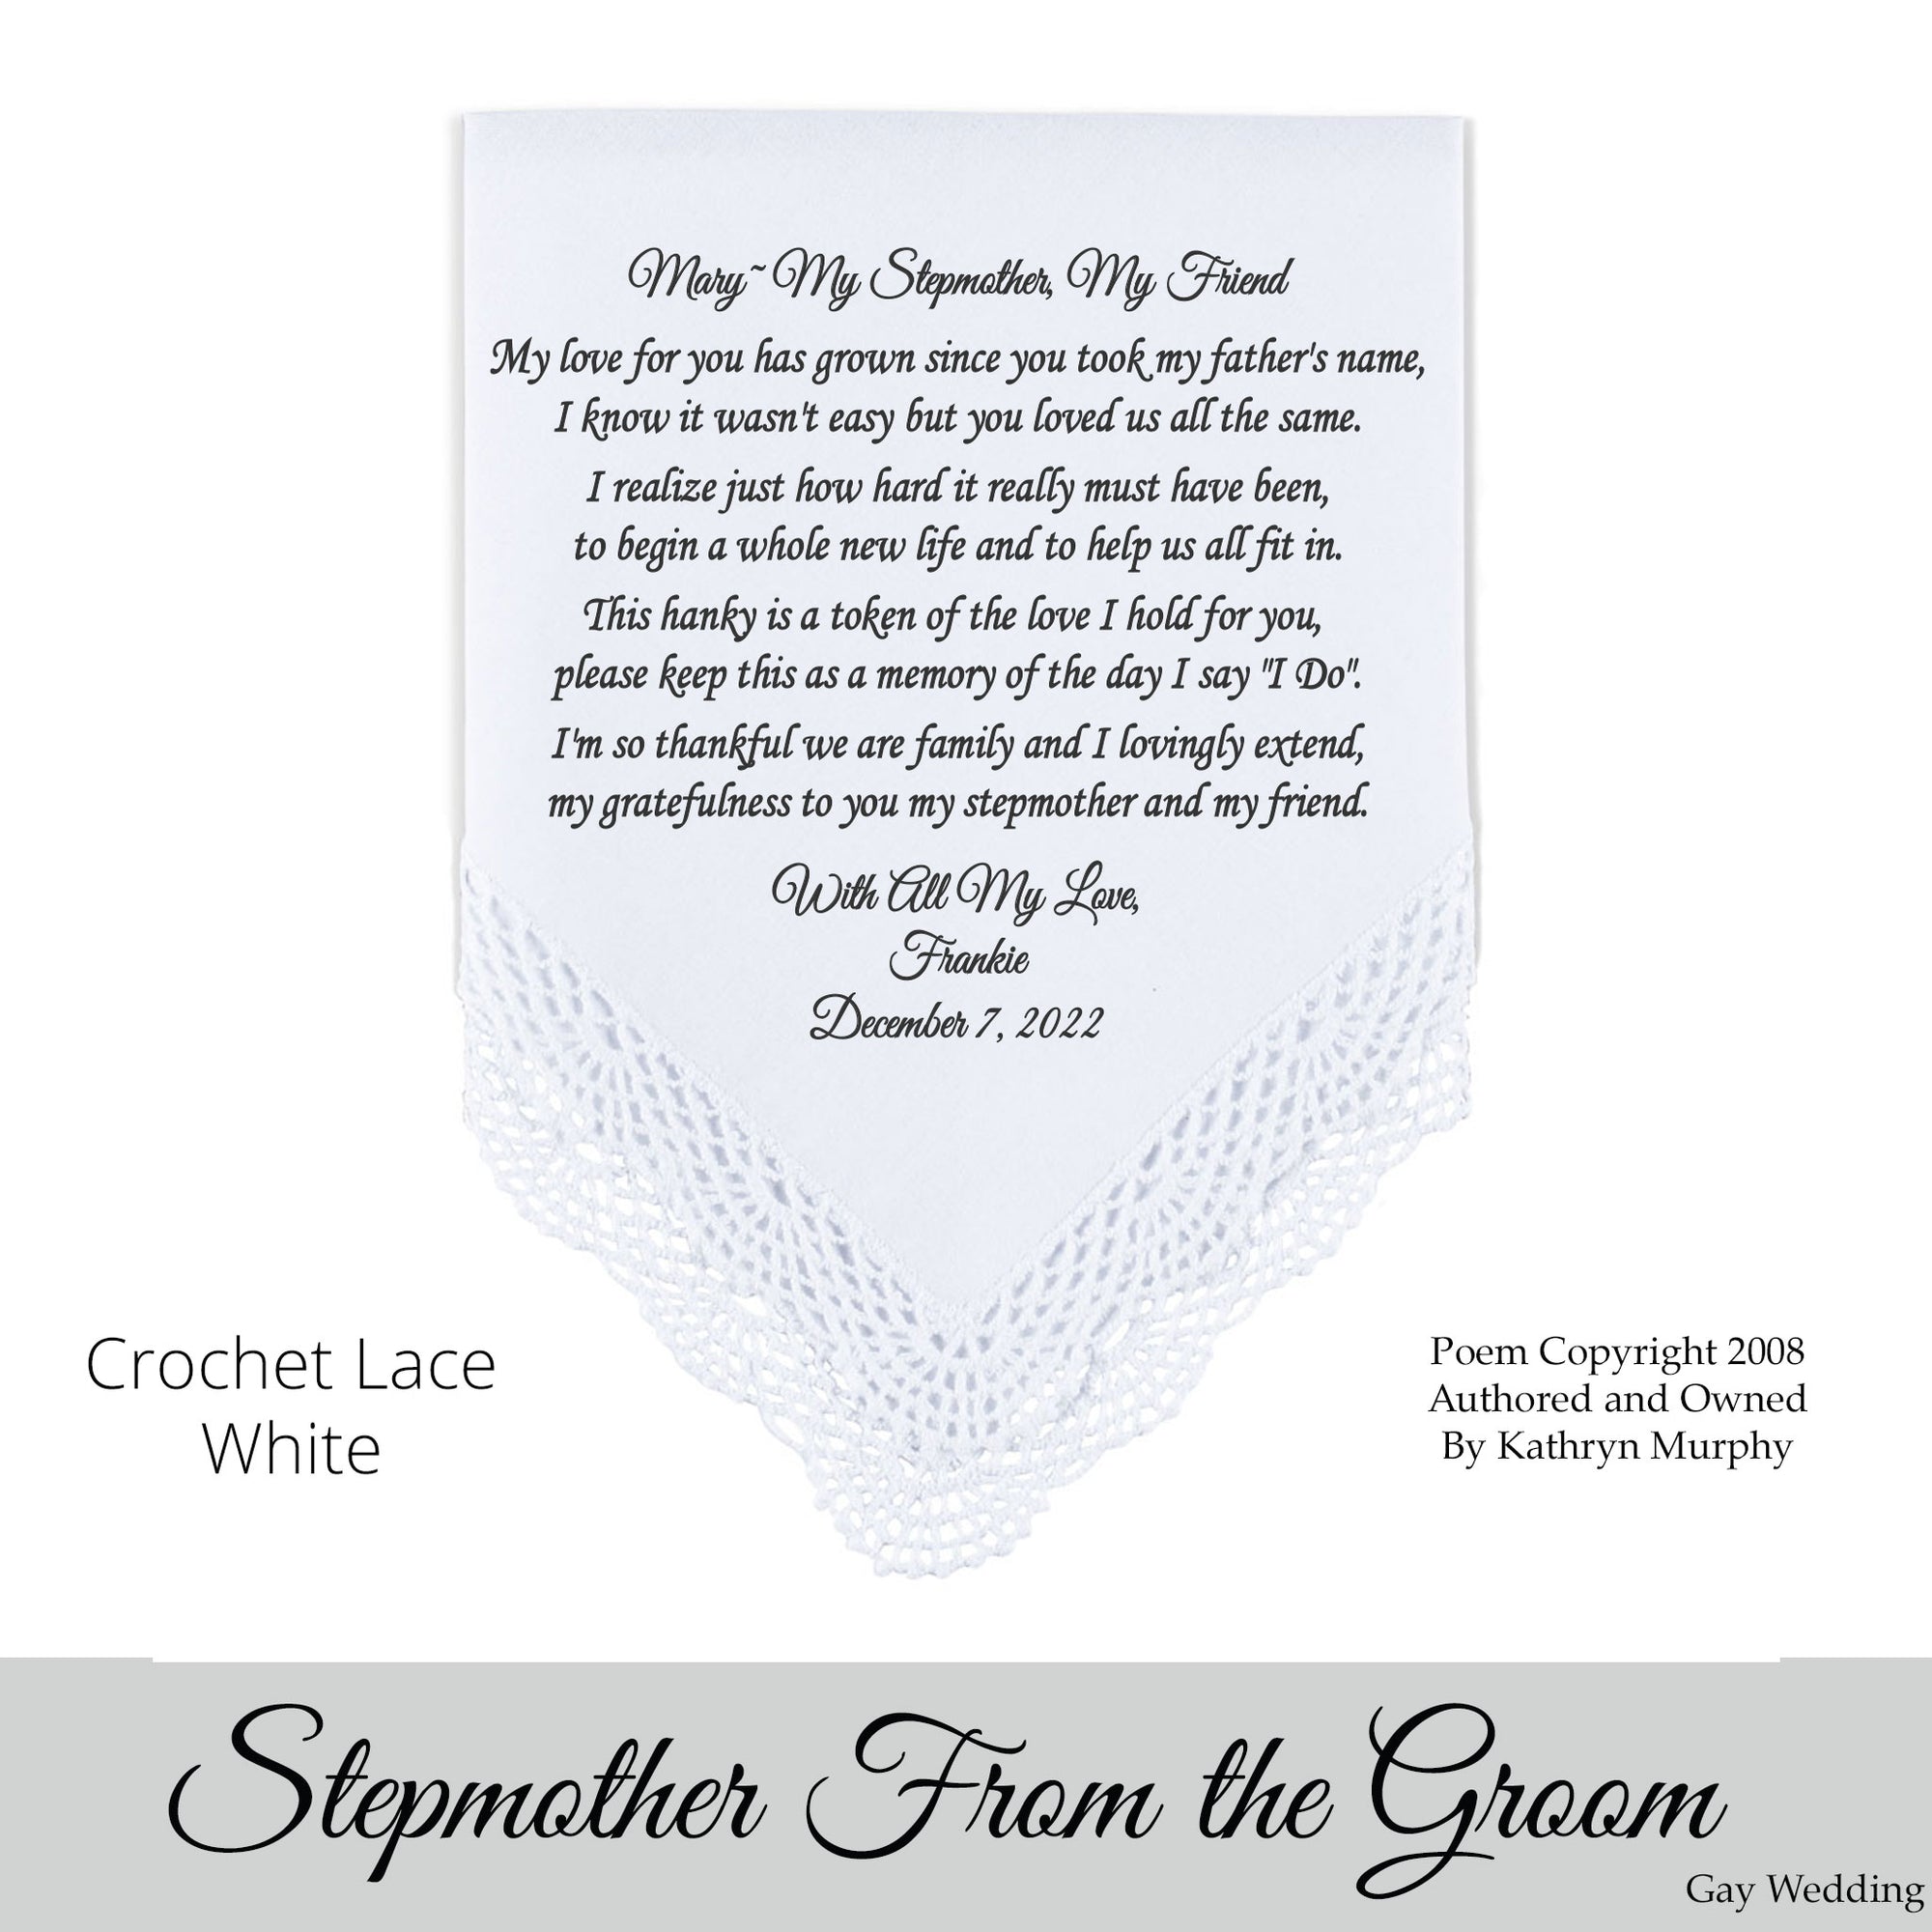 Gay Wedding Gift for the stepmother of the groom poem printed wedding hanki